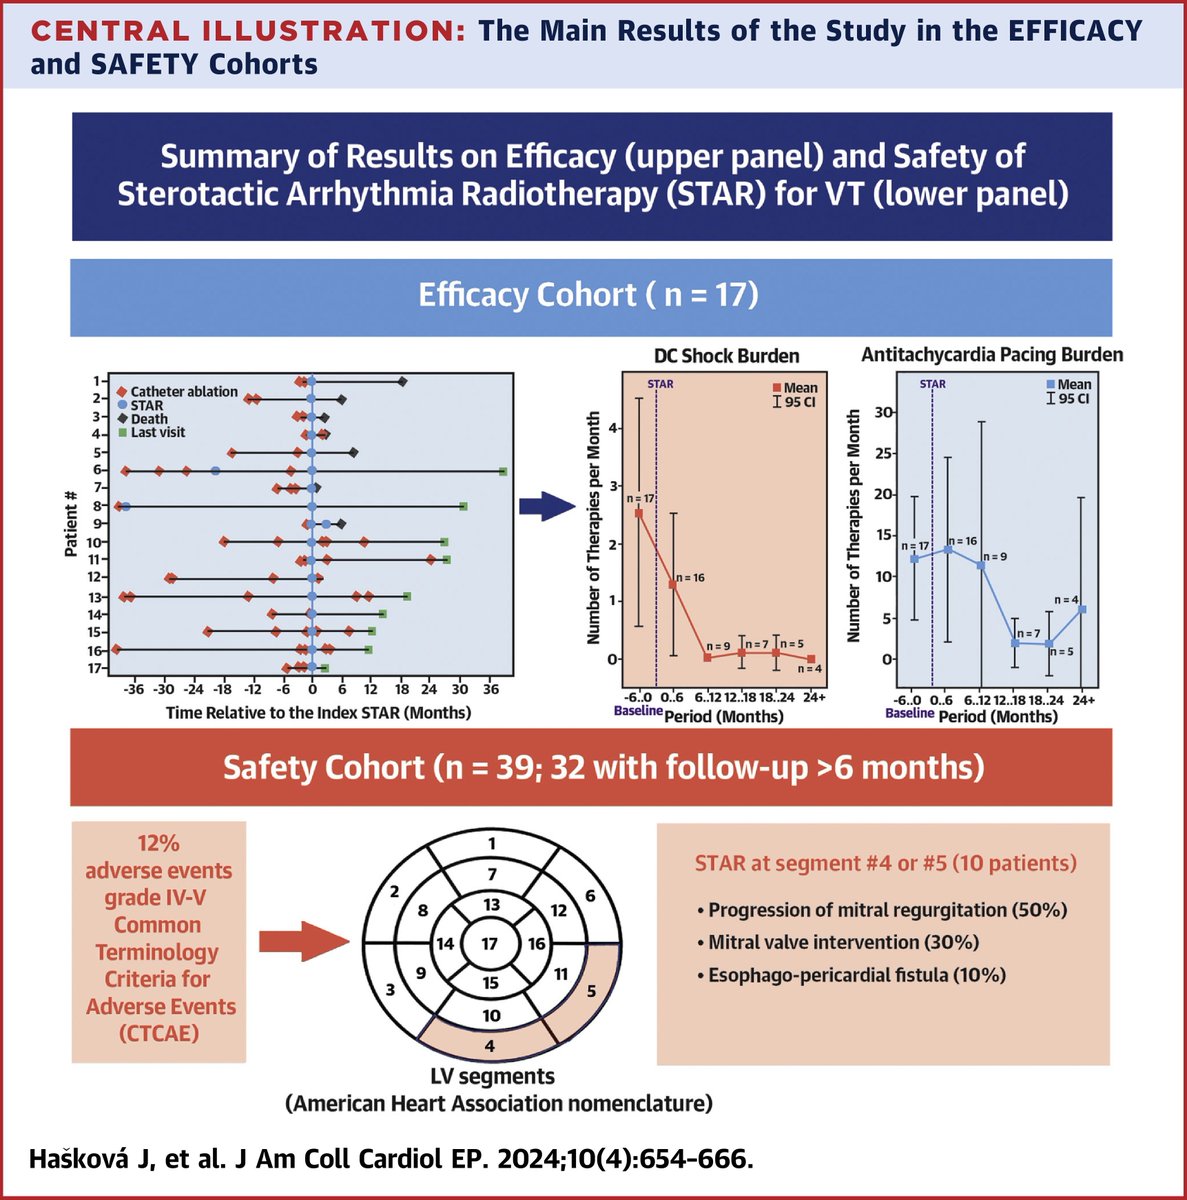 🧵Data from Czech Republic on Stereotactic Radiotherapy (STAR) for recurrent VT. 

👉Although STAR may not be very effective in preventing VT recurrences, it can still modify arrhythmogenic substrate, and when used with additional ablation, reduce number of ICD shocks.